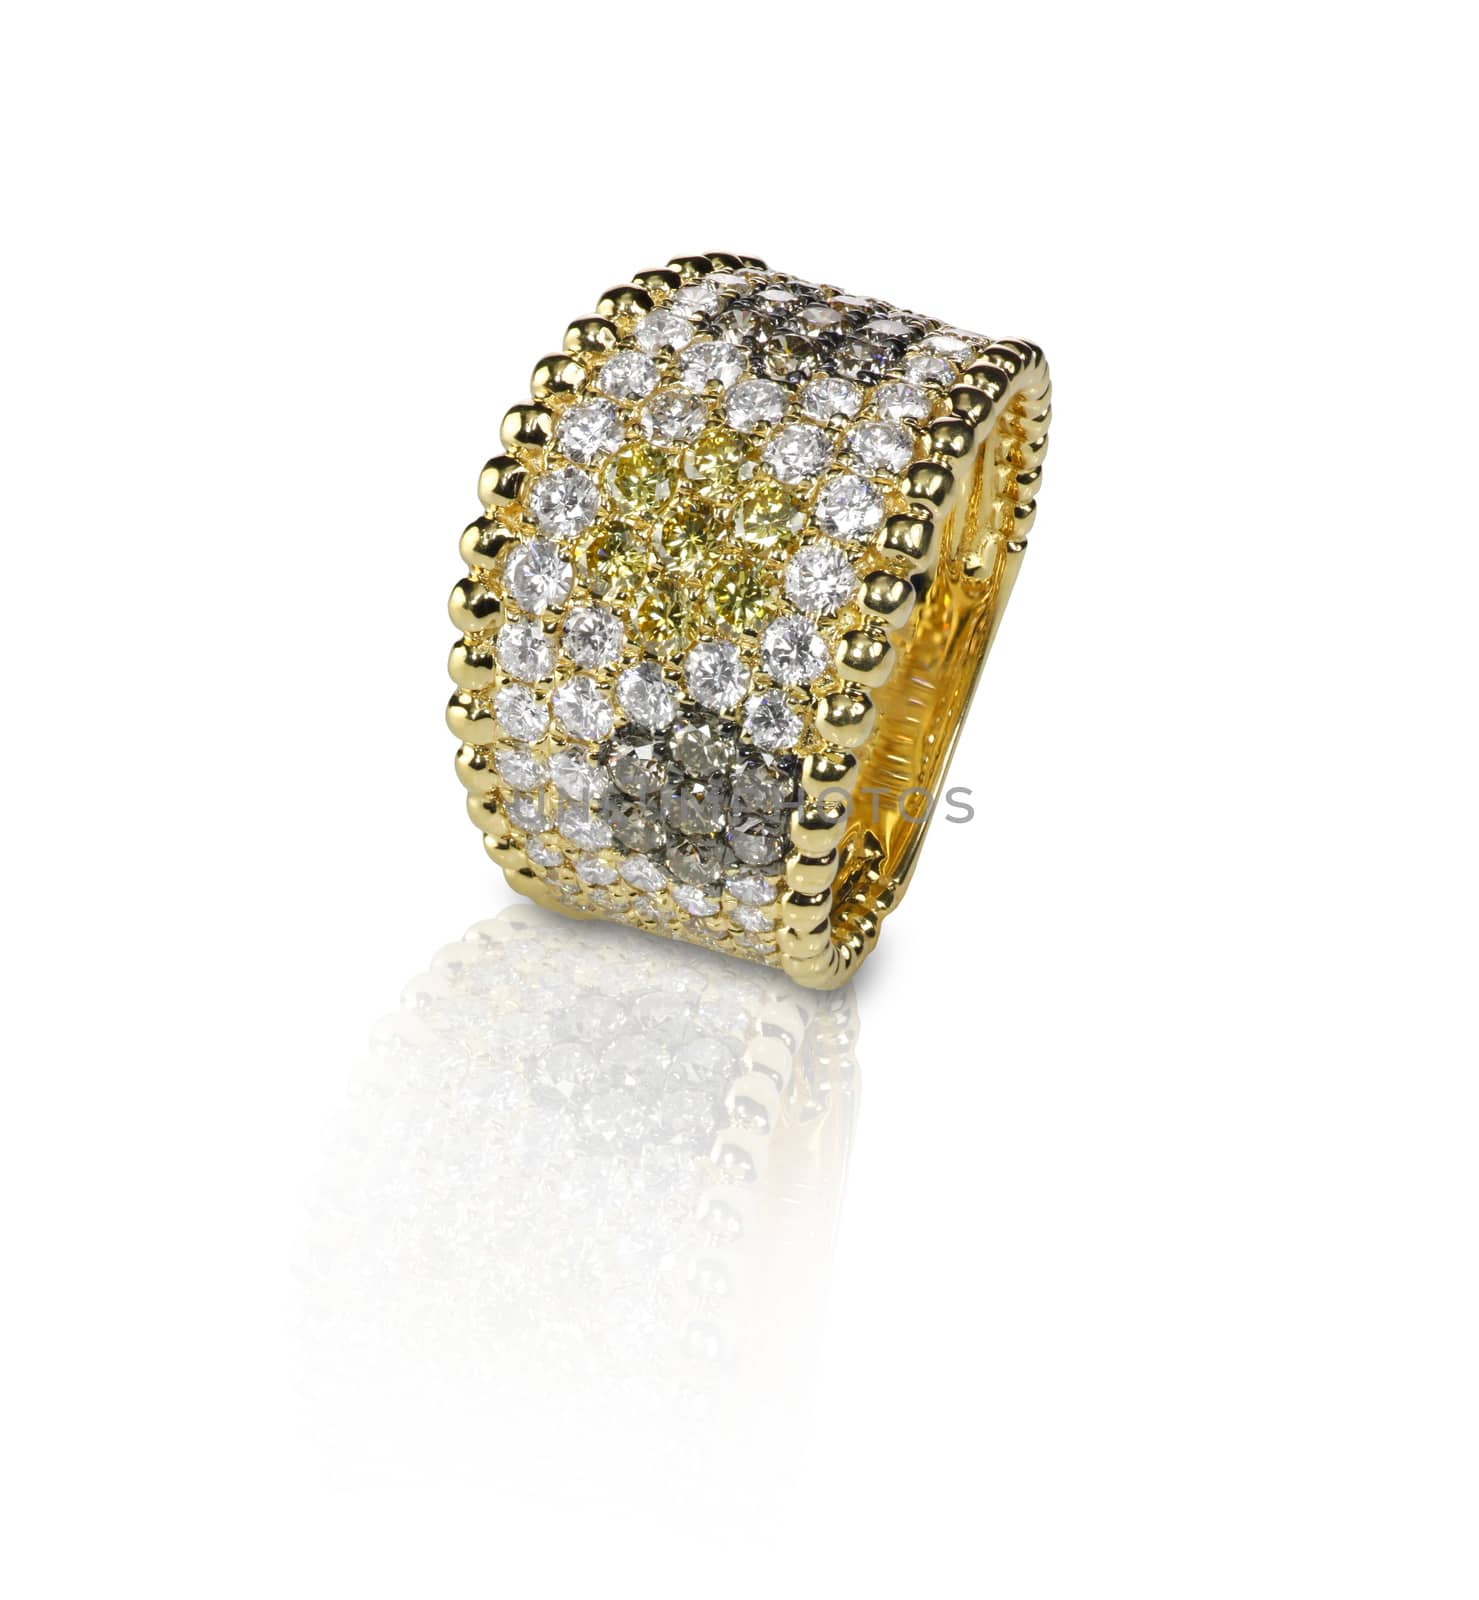 Fancy Colored diamond Pave ring with yellow brown and white stones. Isolated on white with a reflection